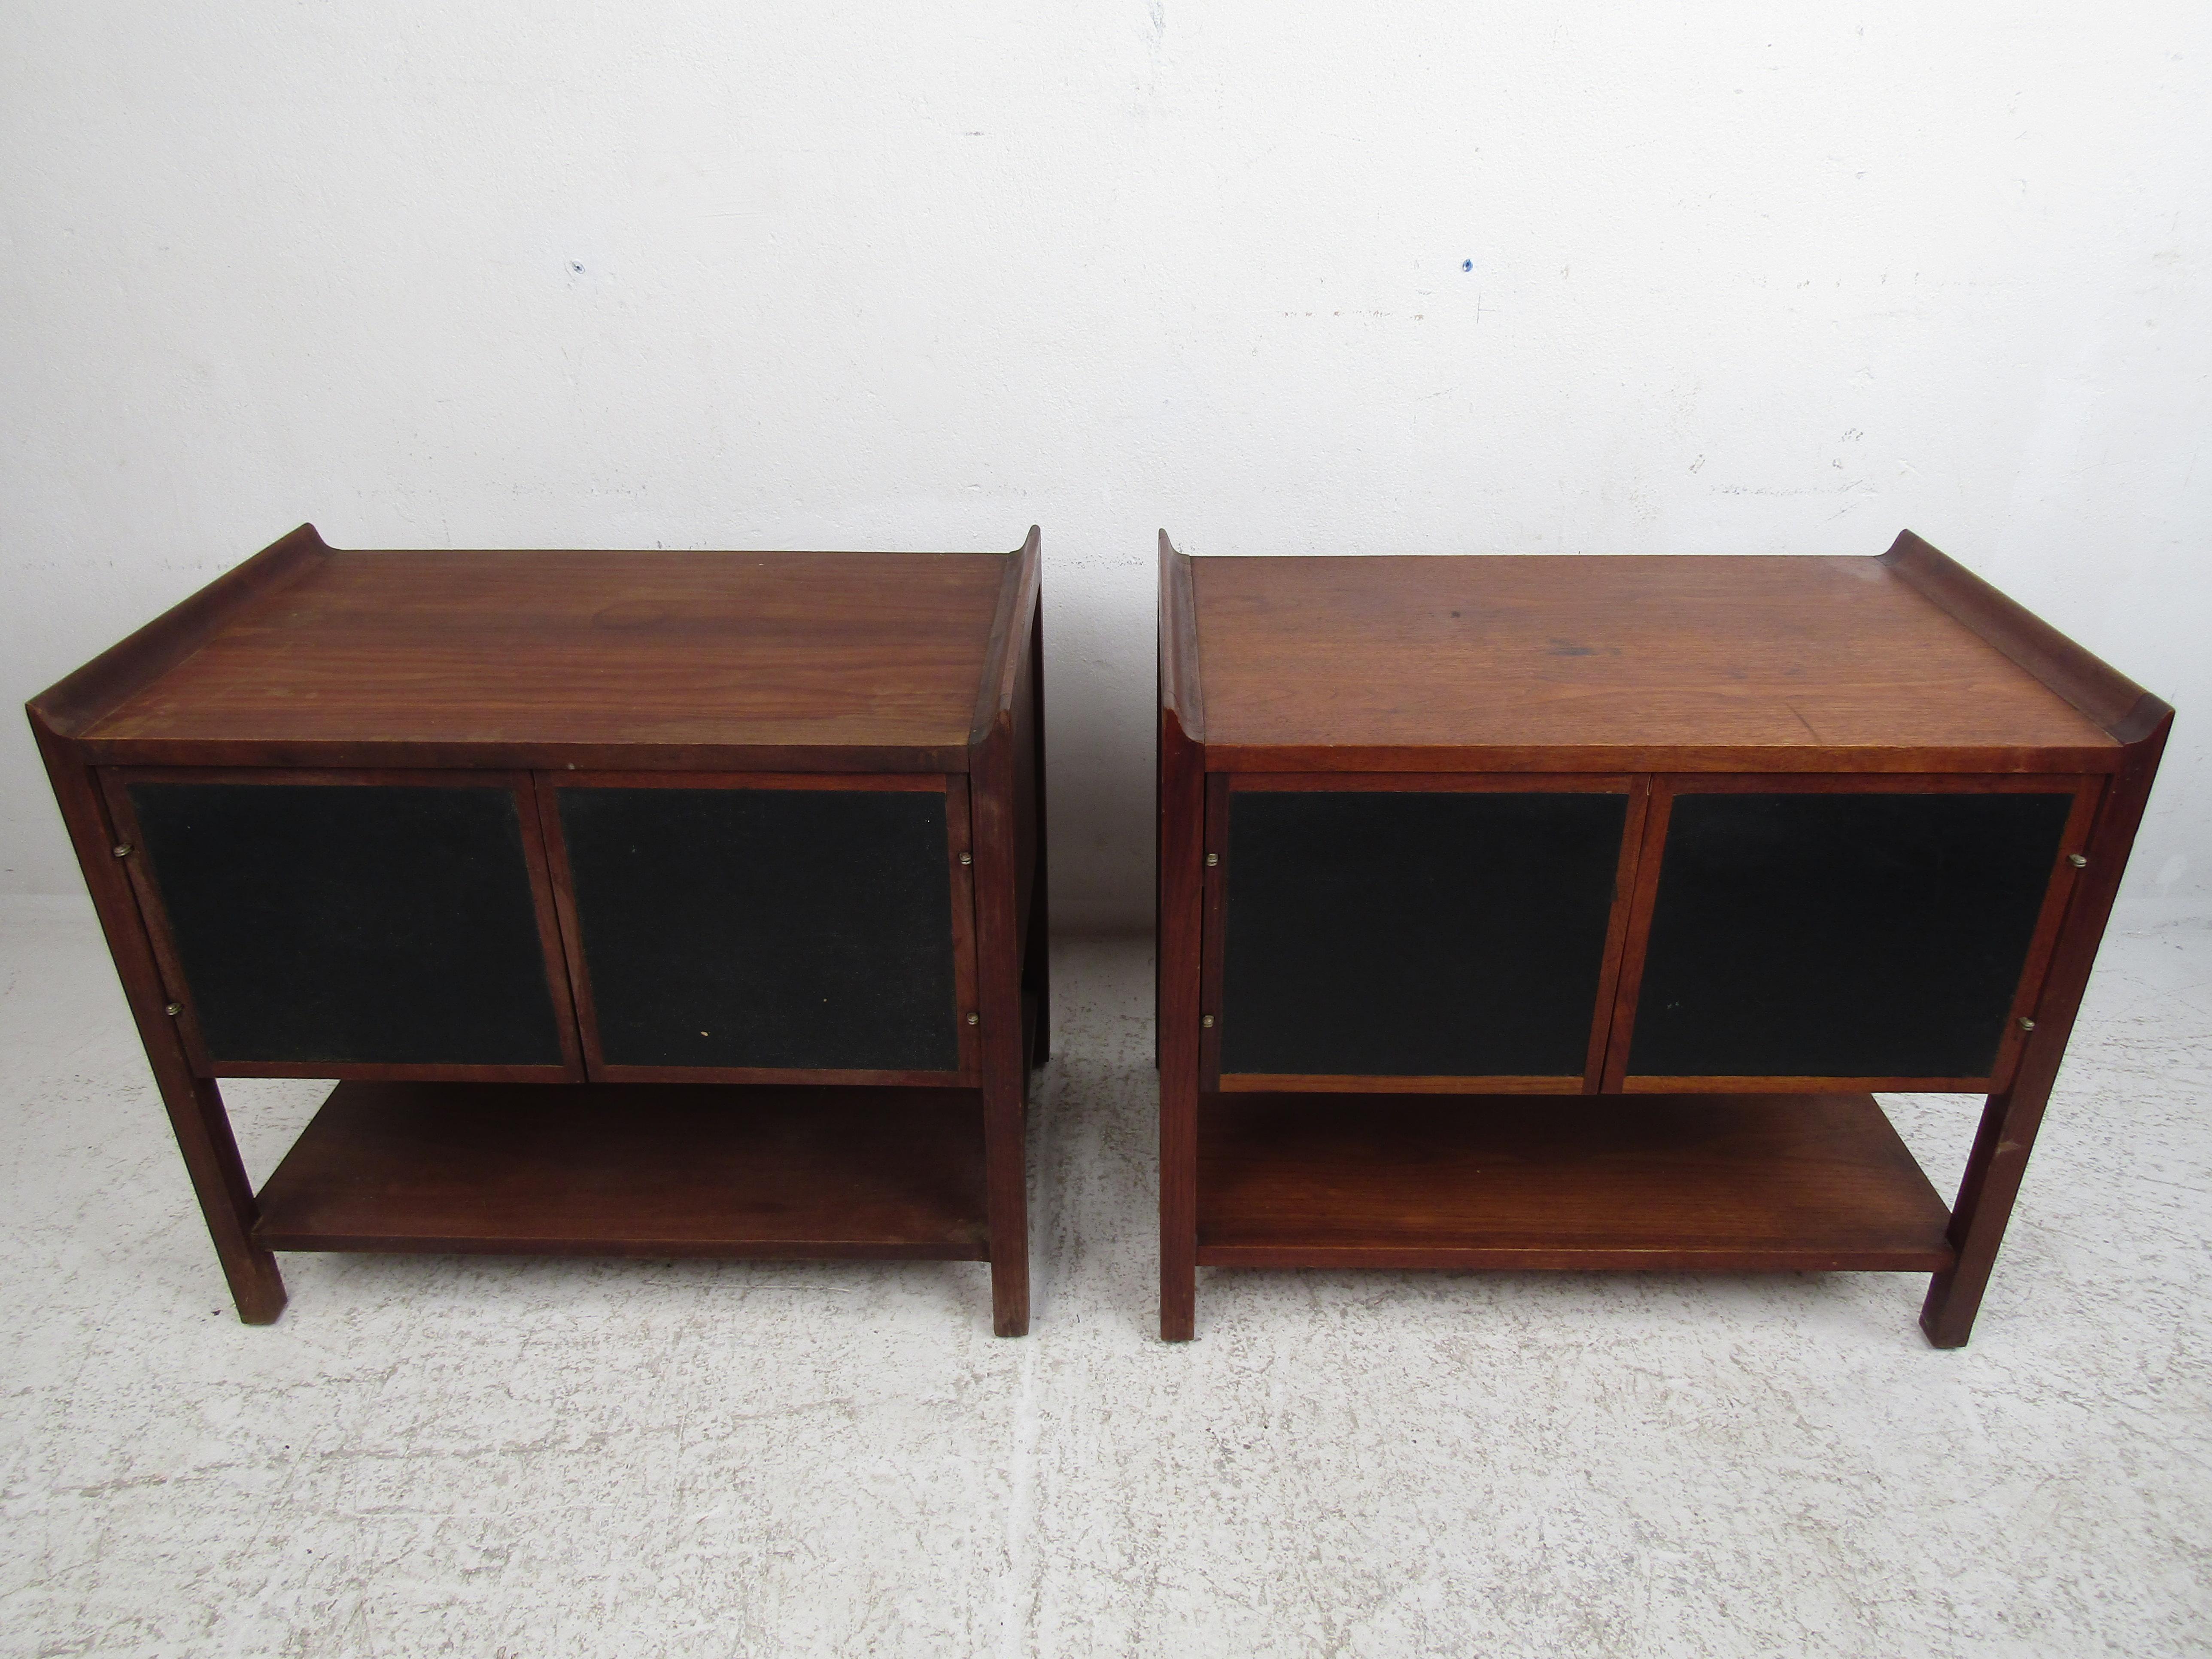 Stylish pair of Mid-Century Modern nightstands, striking design with raised edges on the tabletops, and leather-front accents on the cabinet doors. This pair is sure to make a great addition to any modern interior. Please confirm item location with